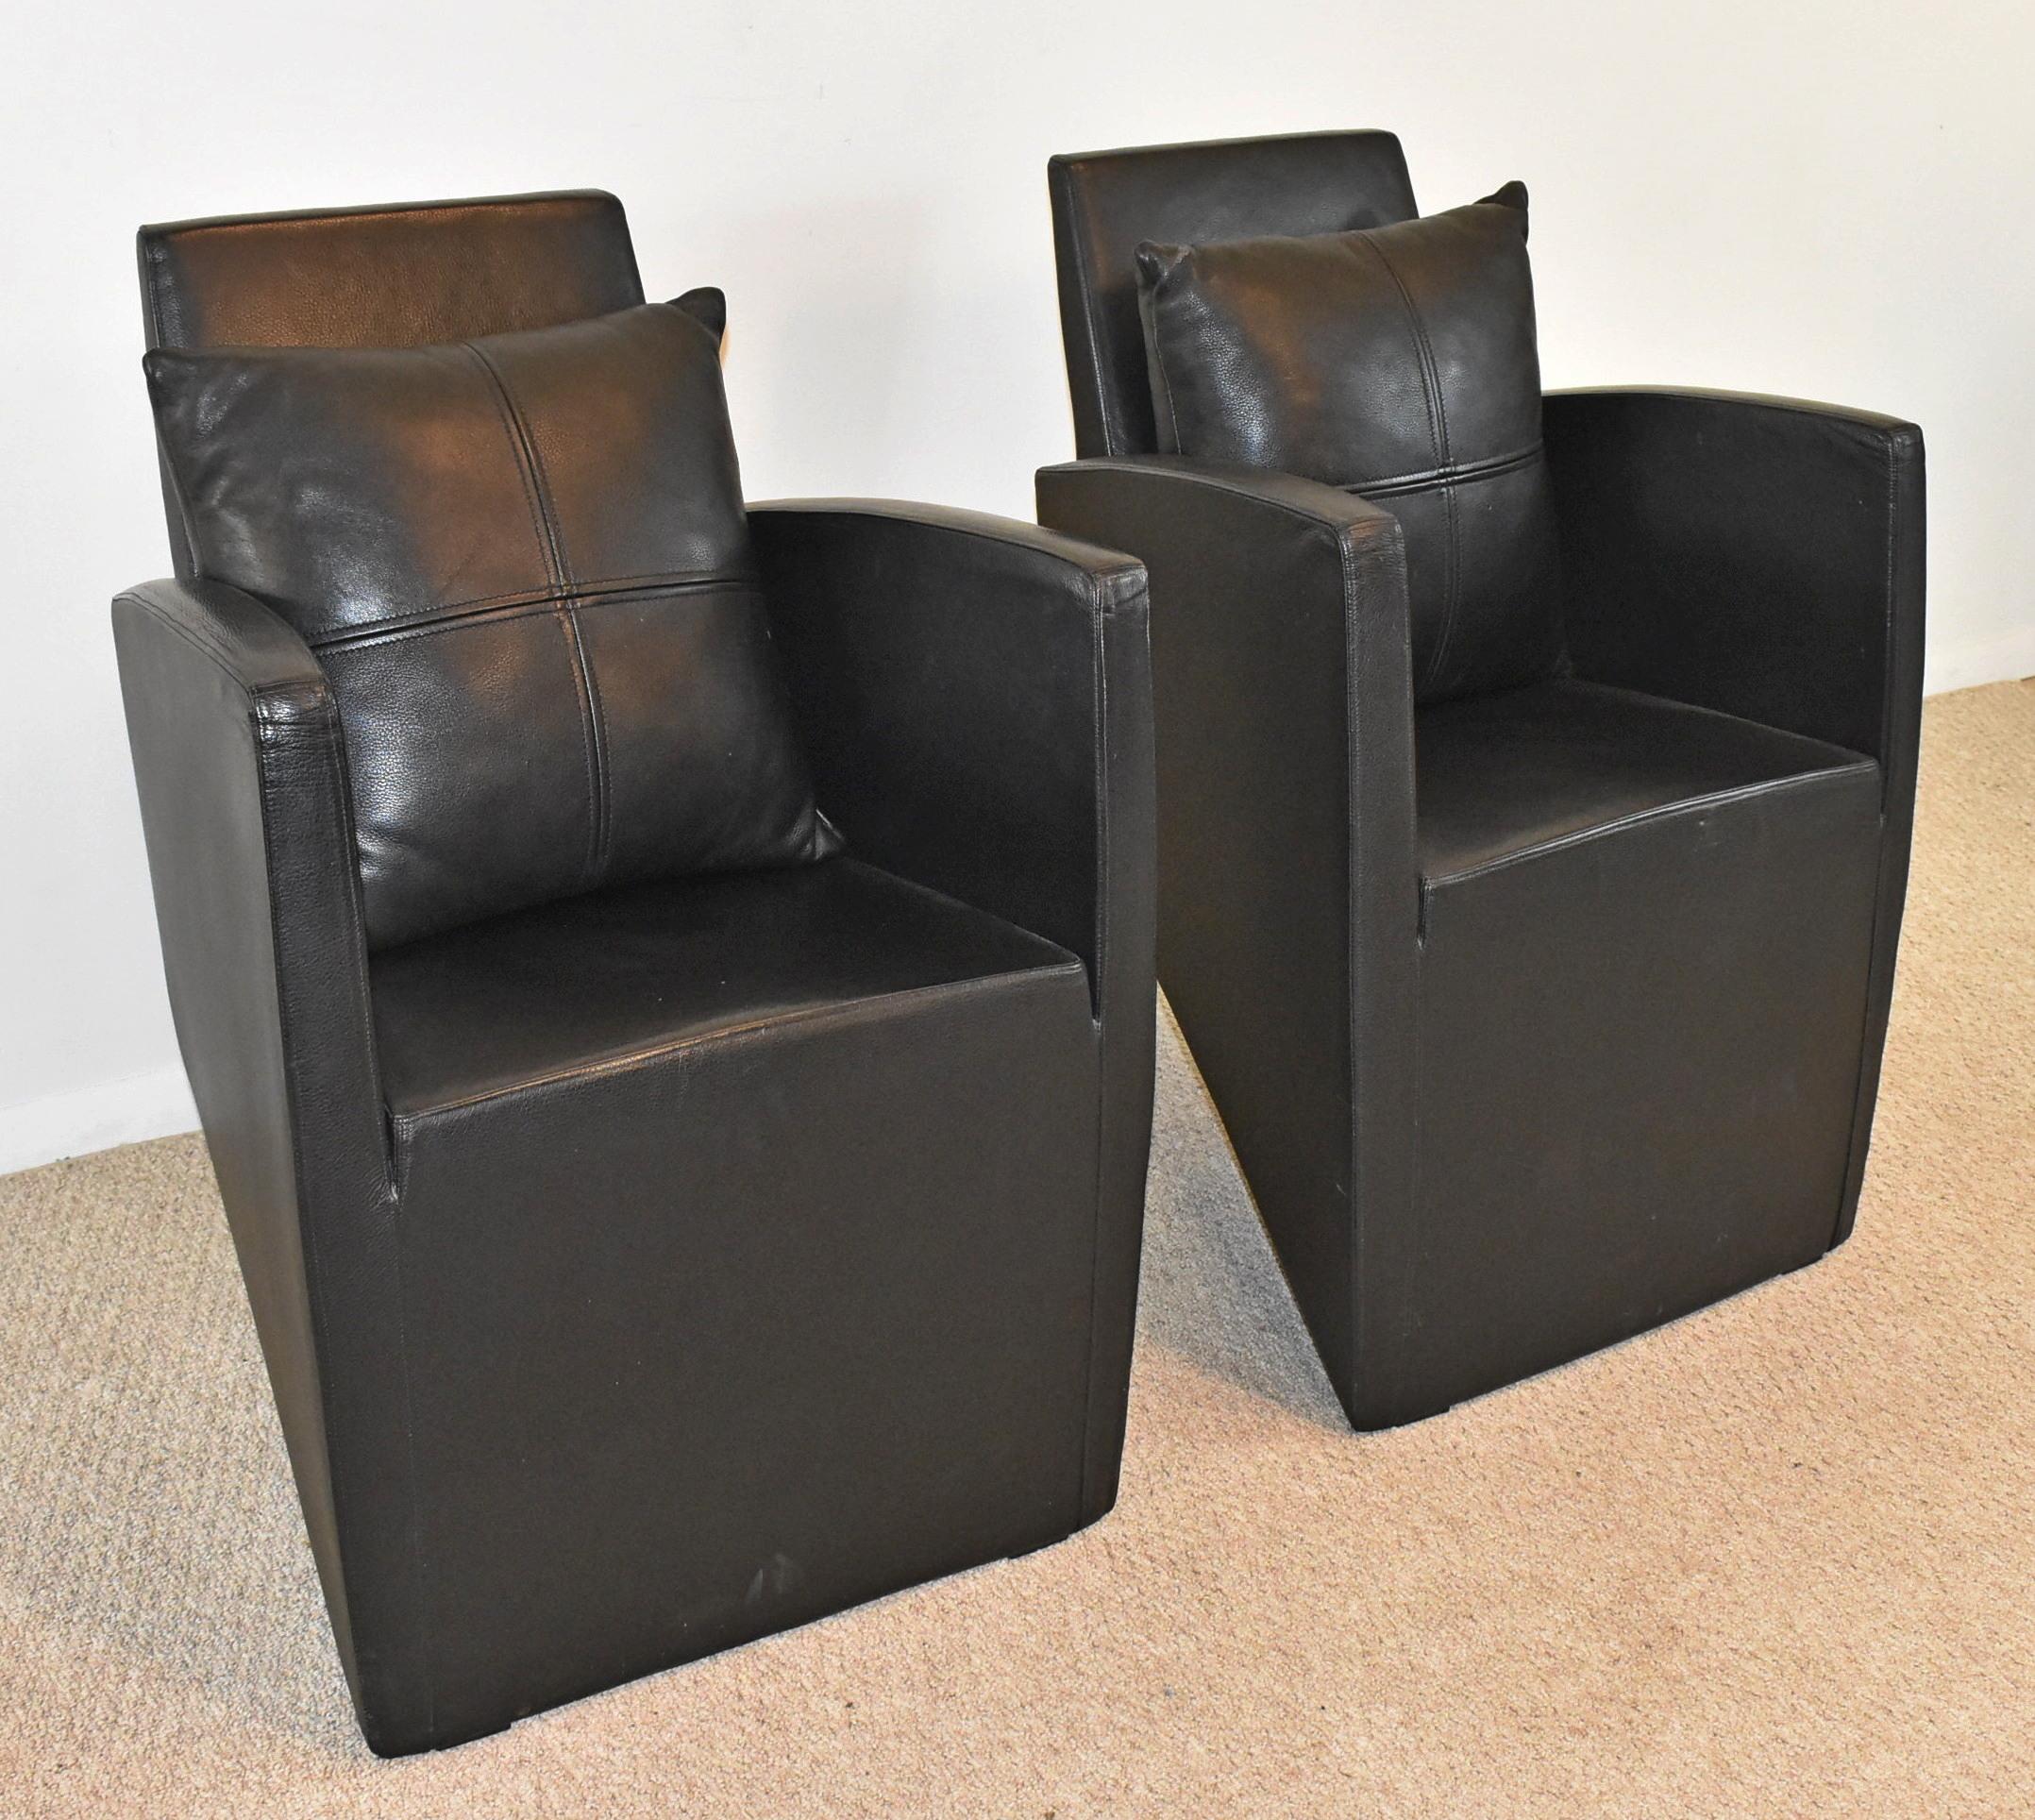 Pair of leather chairs by Philippe Starck for Aleph. circa 1987. Pair of leather lounge chairs with blade-like cast aluminum back leg. Marked on the leg, 